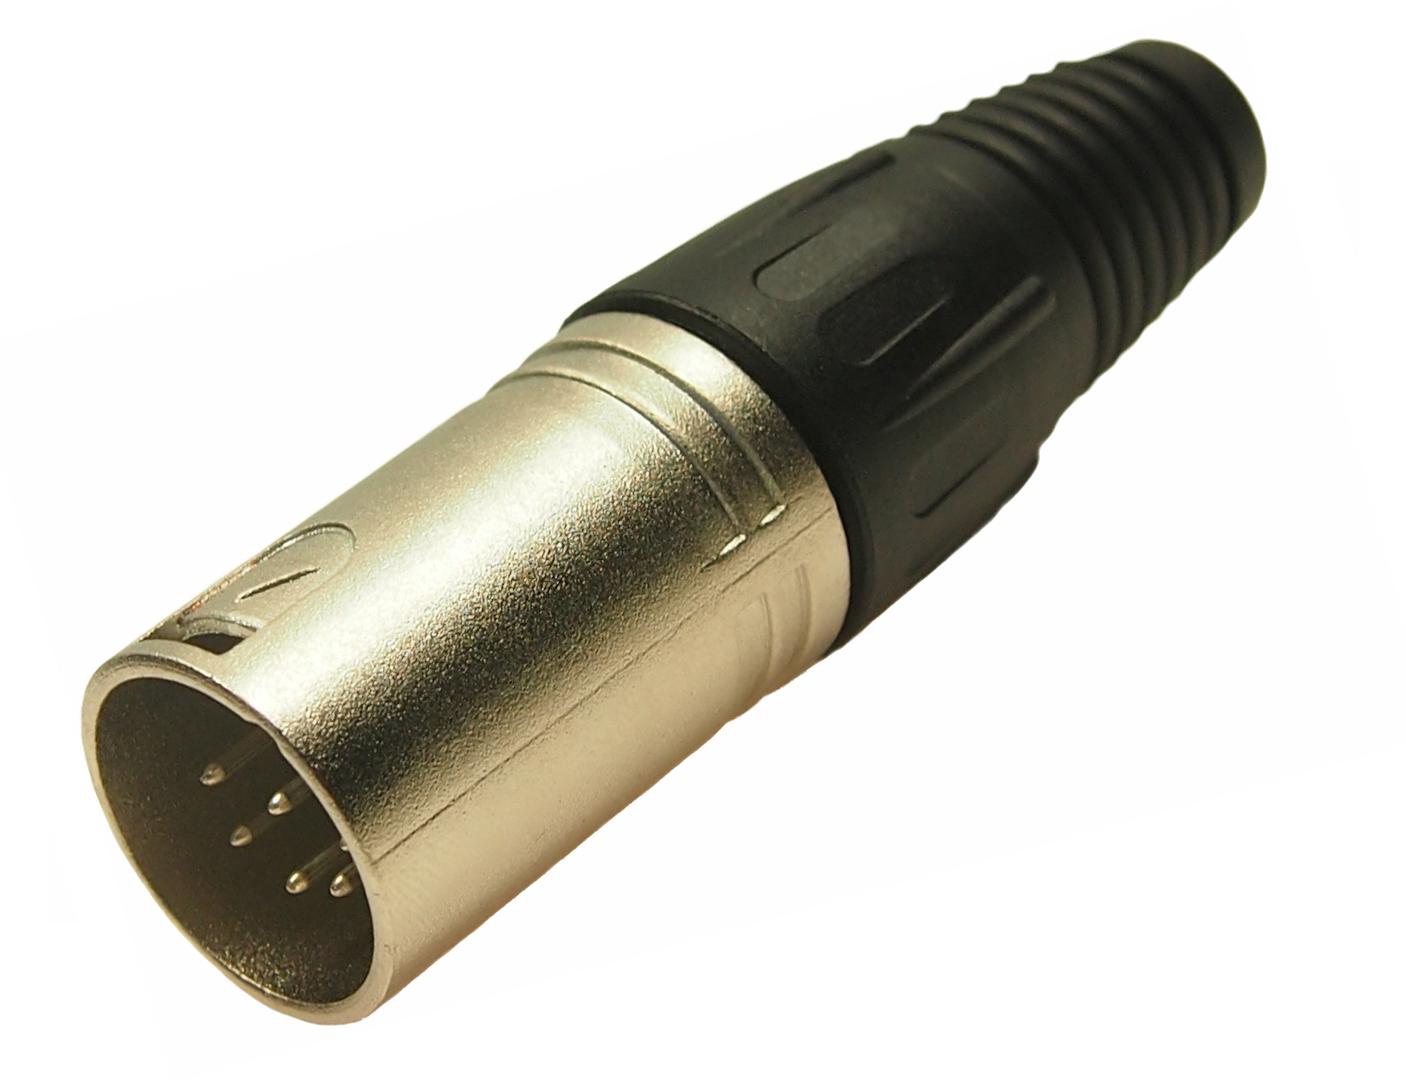 FC6180 XLR CONNECTOR, PLUG, 7POS, CABLE CLIFF ELECTRONIC COMPONENTS